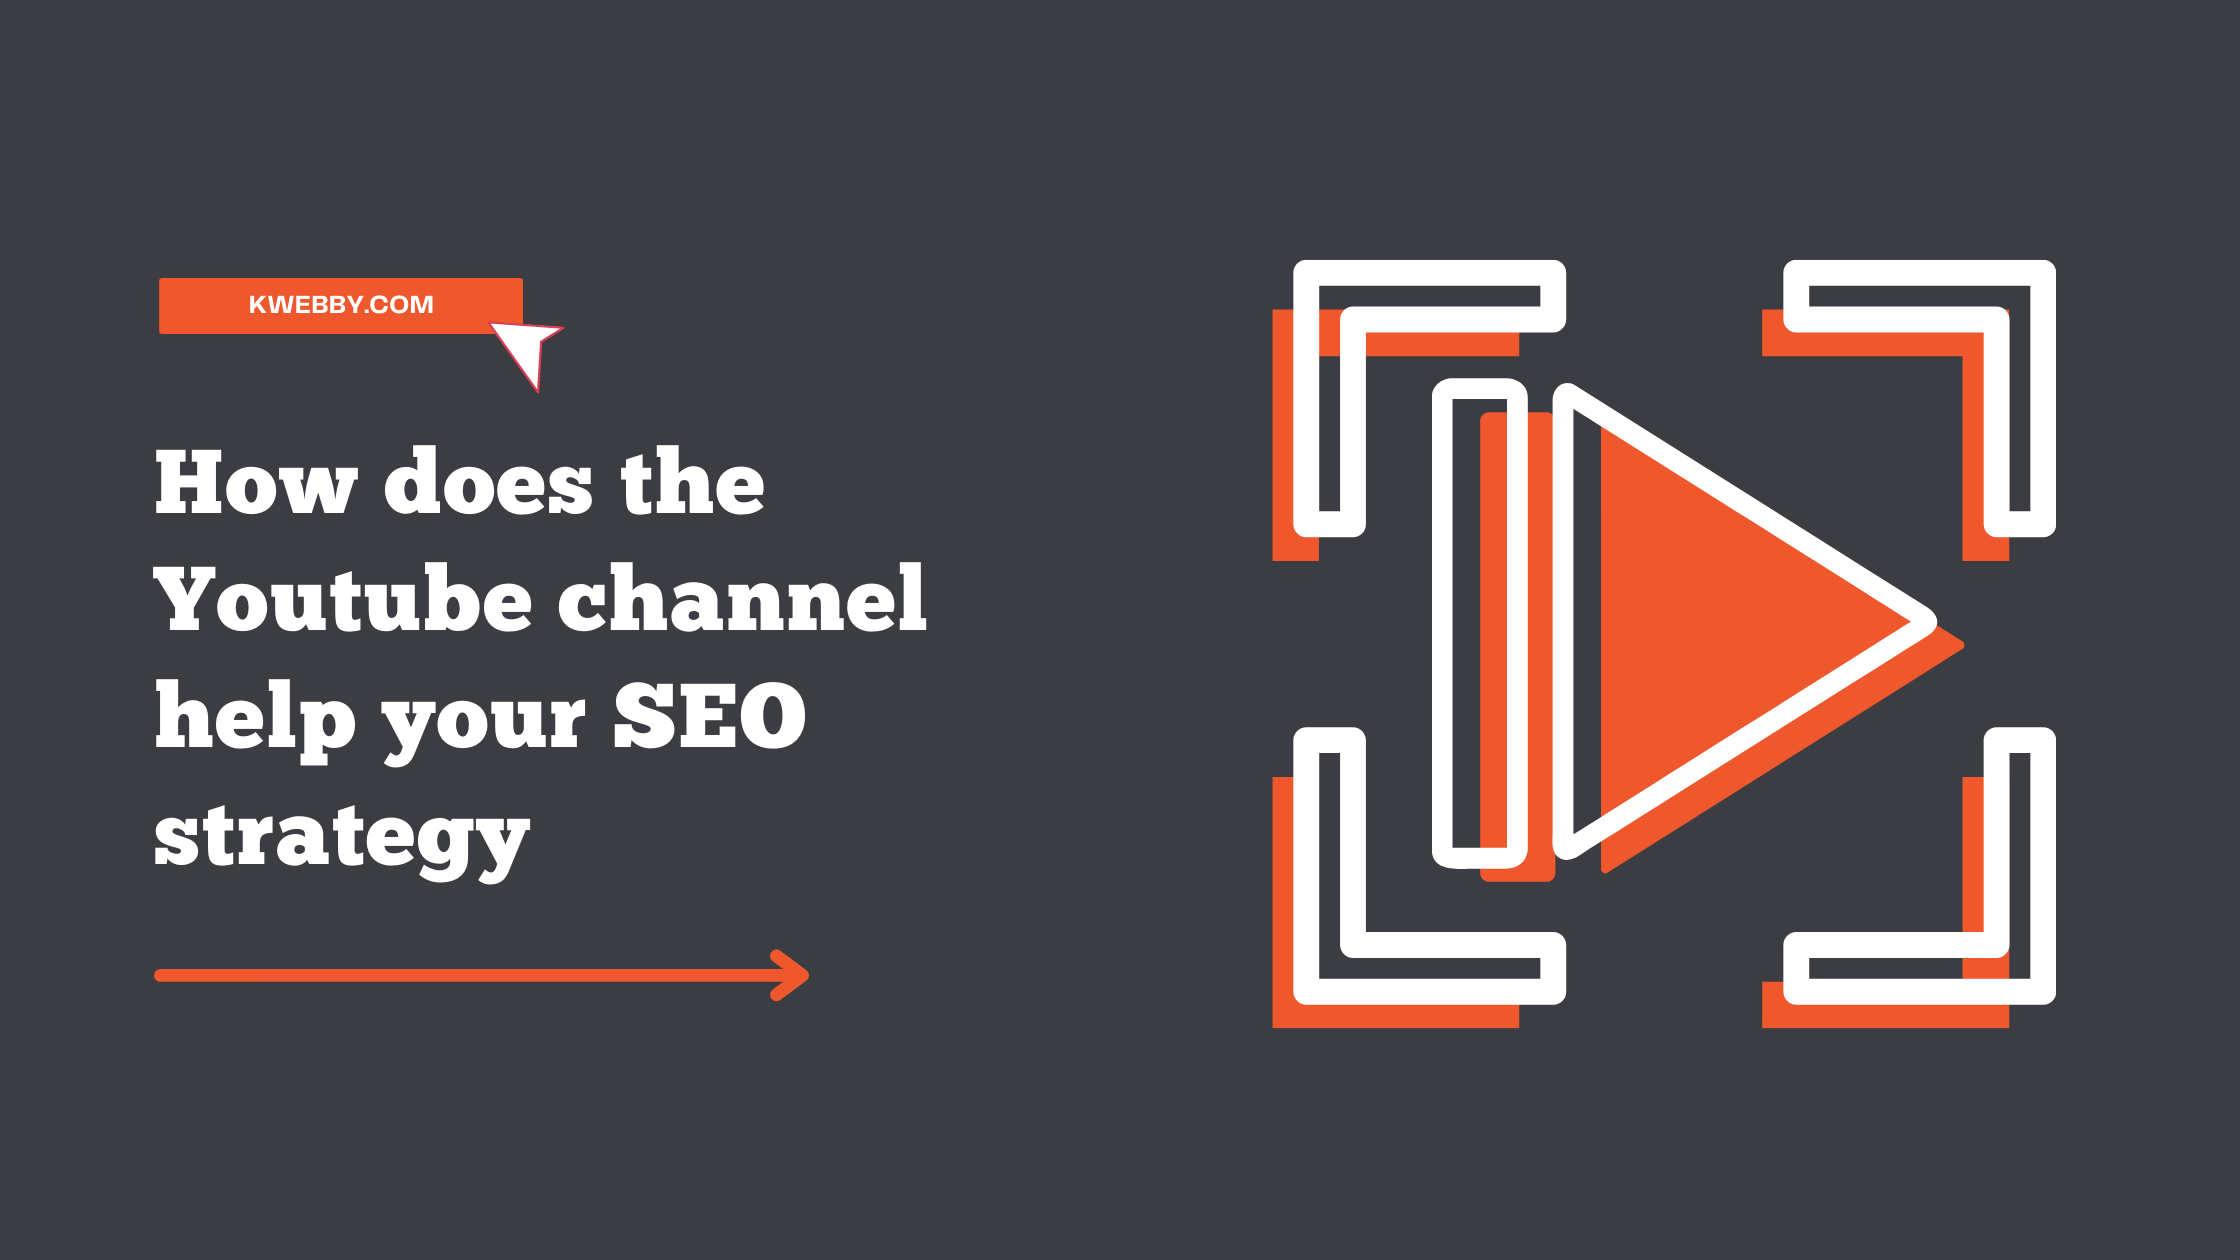 How does the Youtube channel help your SEO strategy?